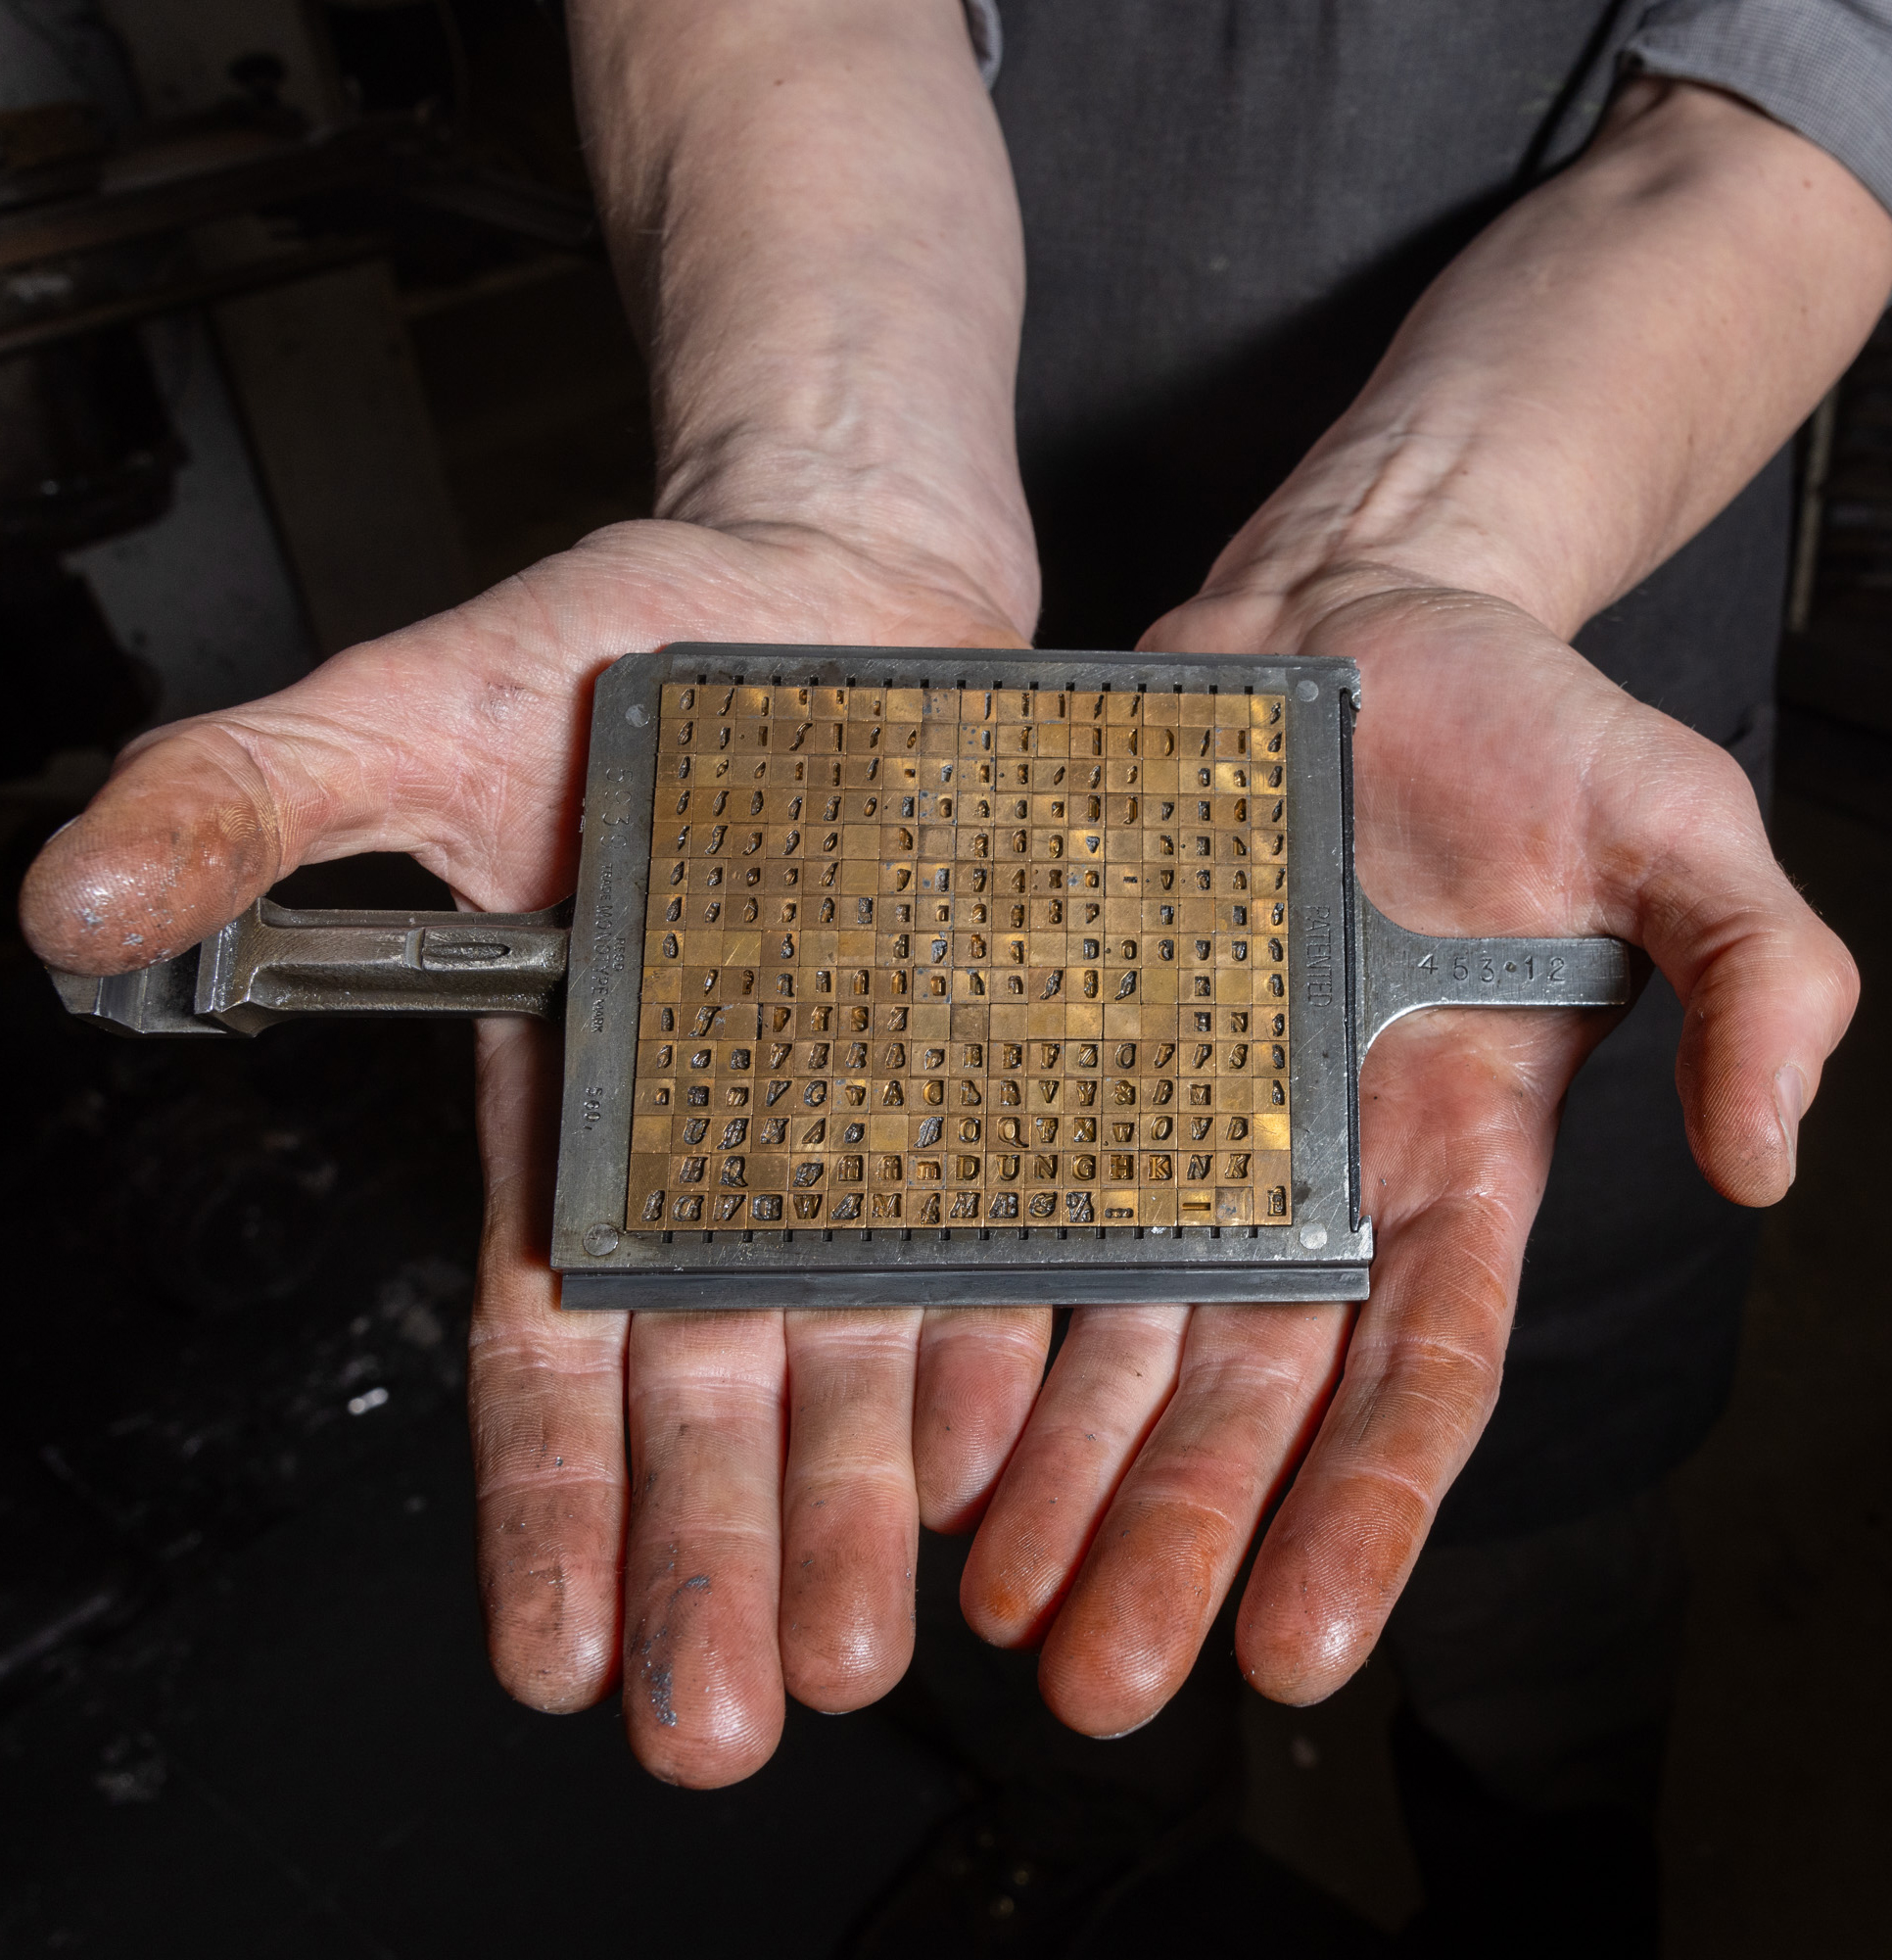 Dusty hands hold a large metal stamp with tiny, raised letters and numbers. It's used in printing or labeling.